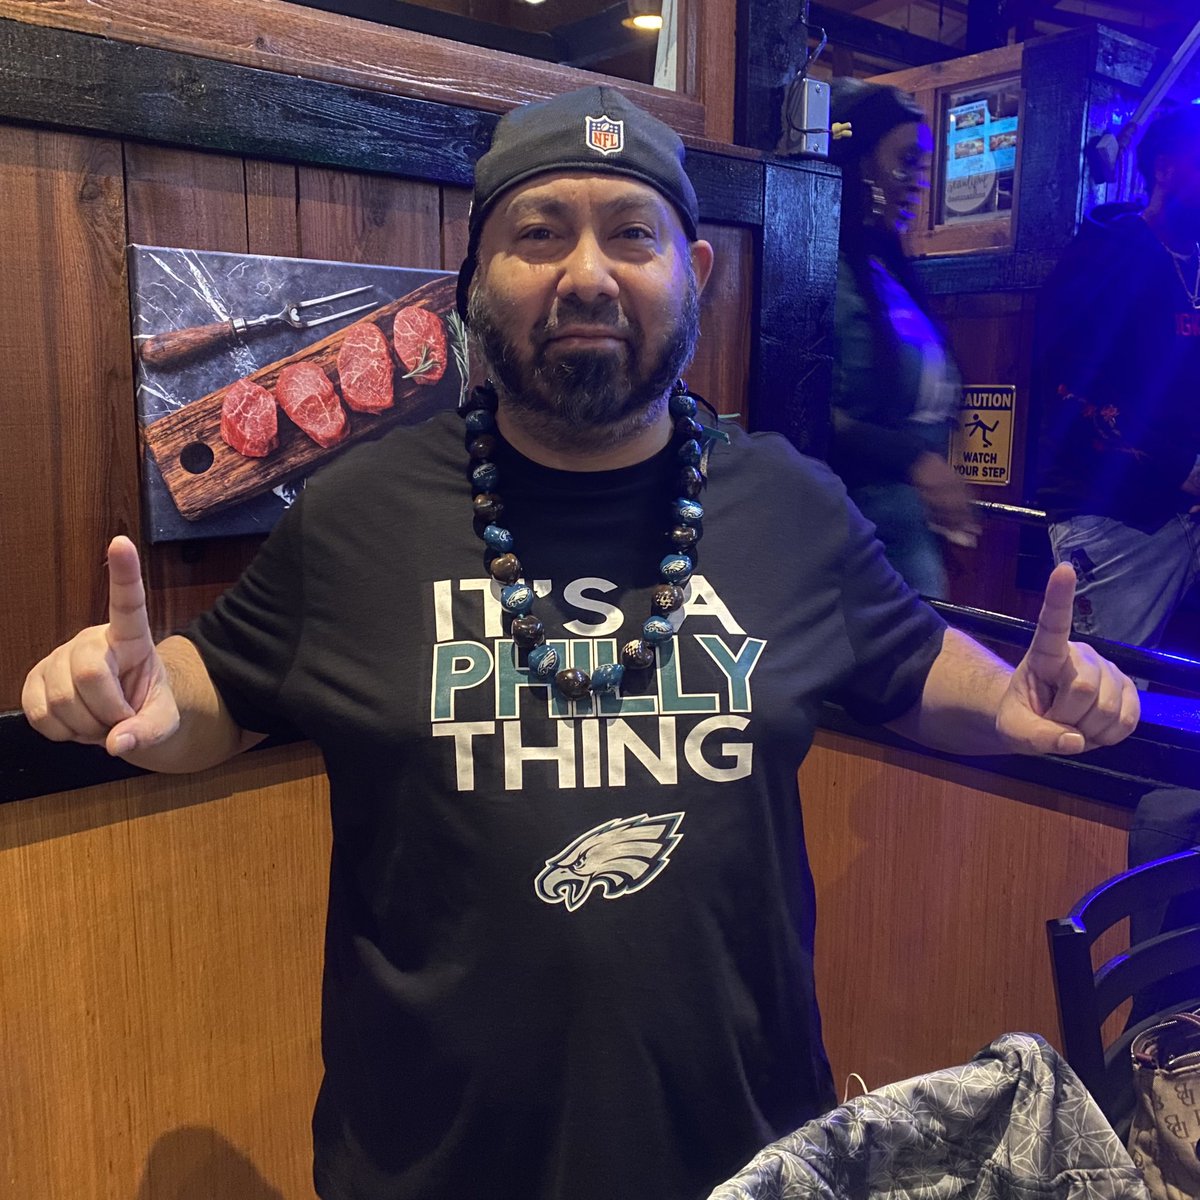 We are ready. There’s been a feeling around this team all year. #itsaphillything 💚🦅💚 #flyeaglesfly #gobirds #superbowl #eaglessuperbowl #chiefsvseagles #eagles #eaglesnation #birdgang #westcoasteagles #northwestbirdgang #philadelphiaeagles #superbowlbound #superbowl57